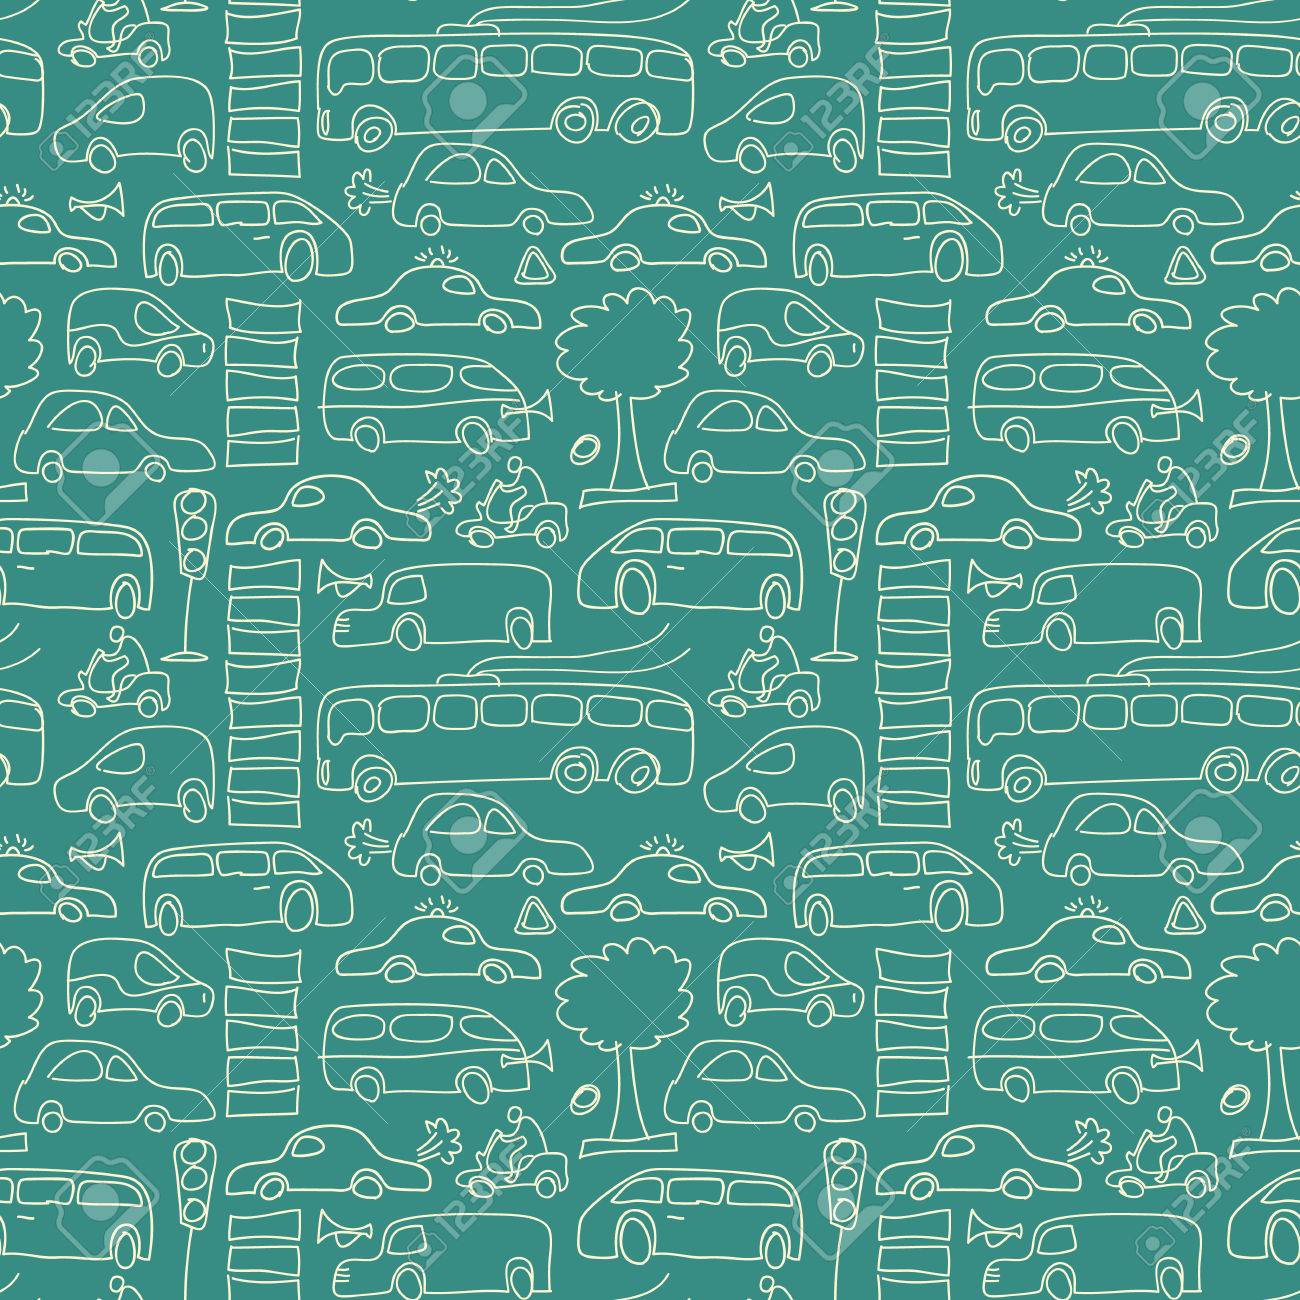 Green Seamless Transport Background Pattern With Trees Cars Motos